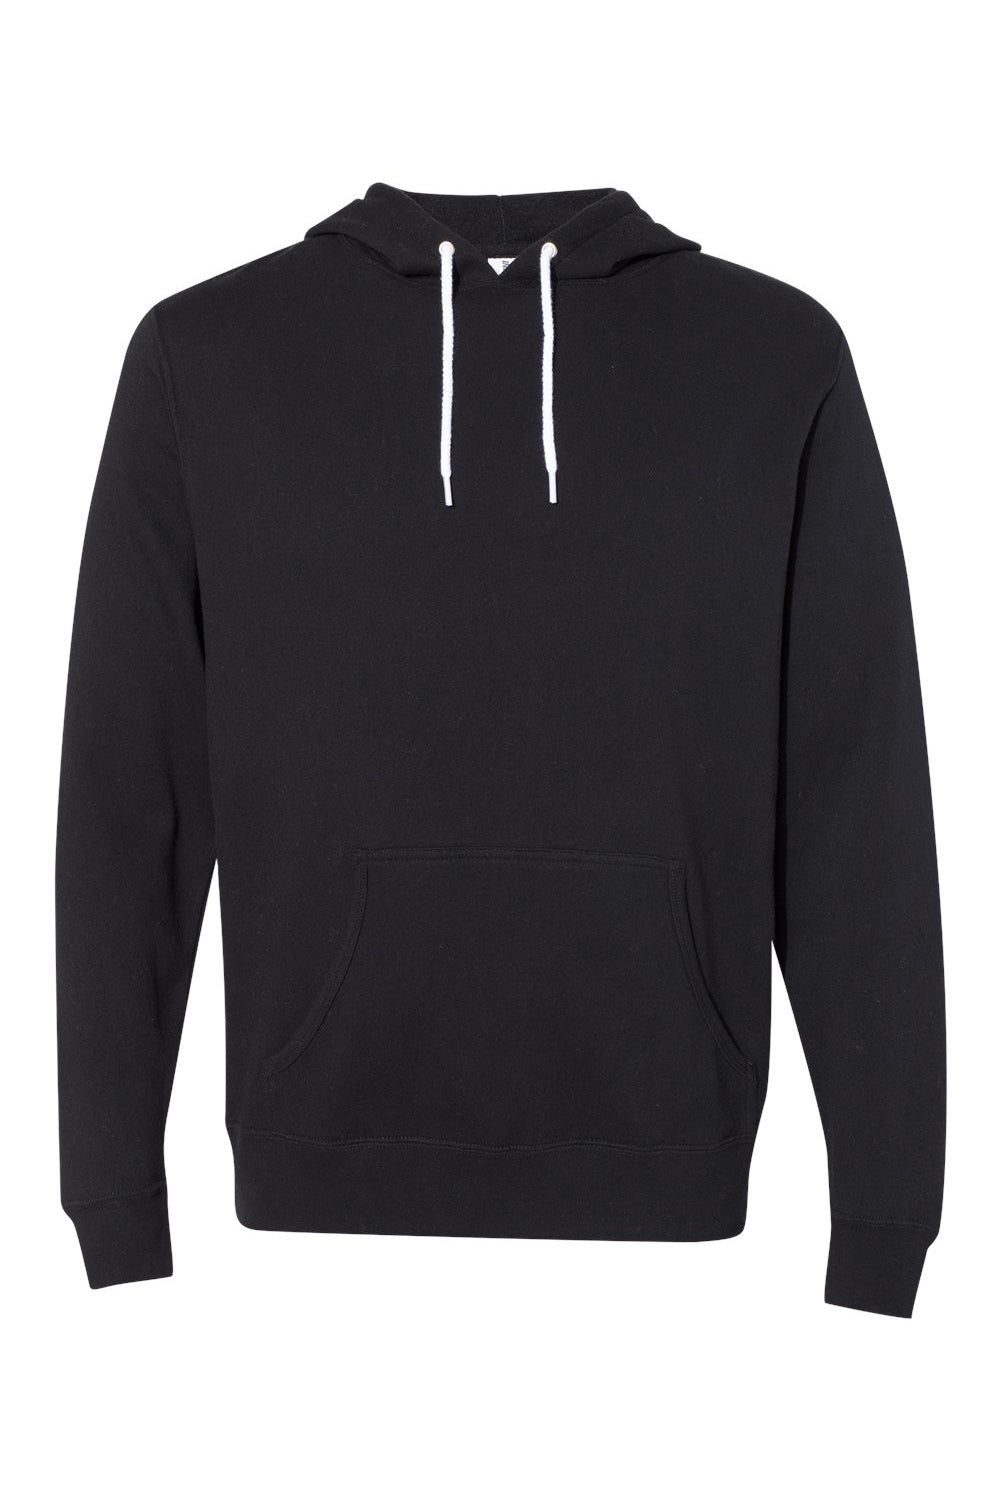 Independent Trading Co. AFX90UN Mens Hooded Sweatshirt Hoodie Black Flat Front